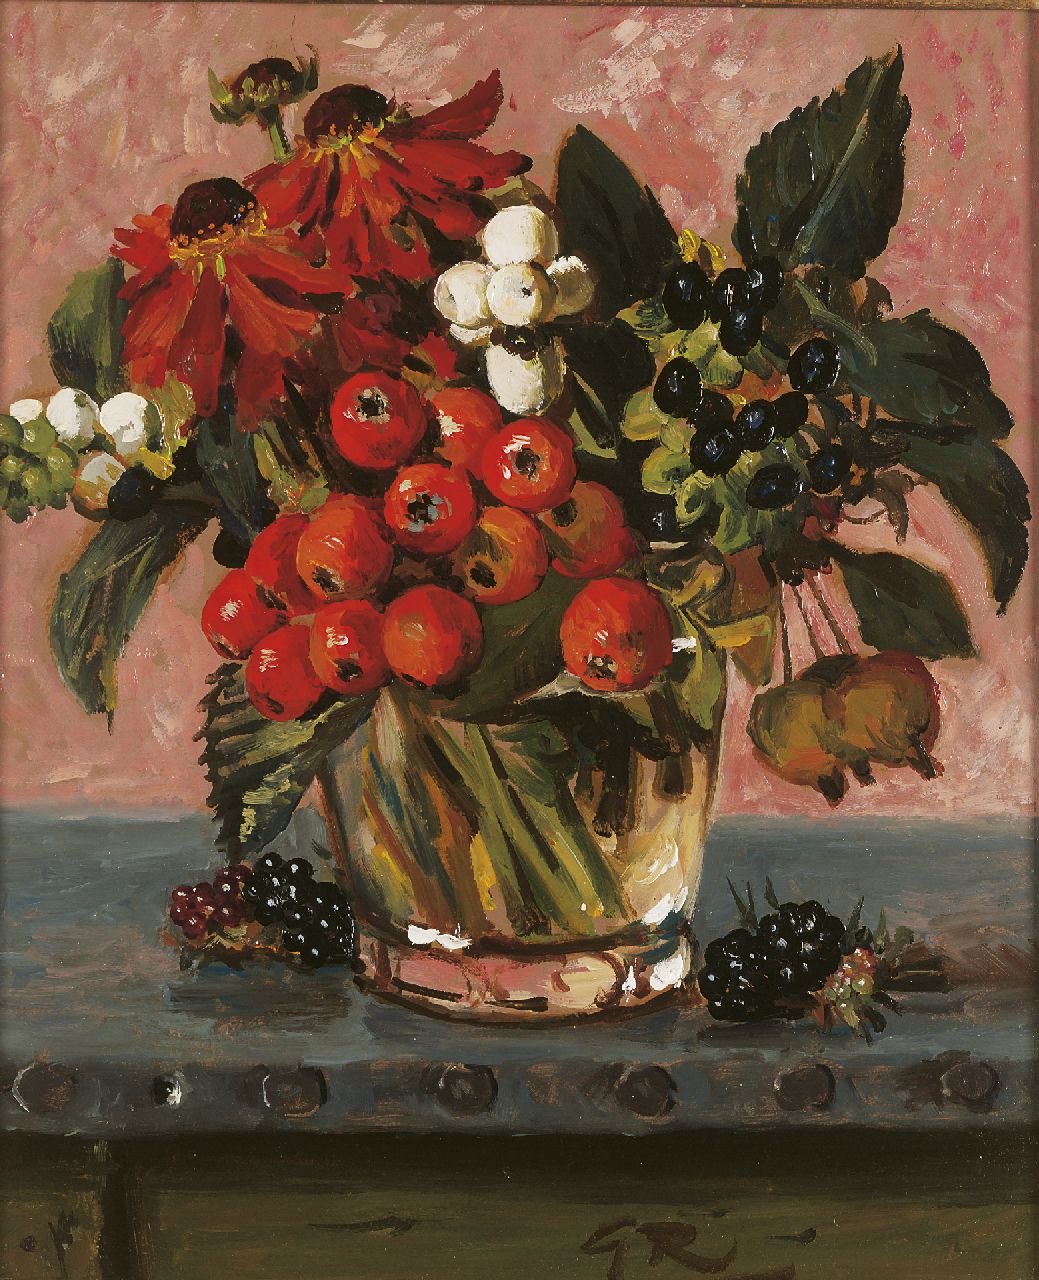 Röling G.V.A.  | Gerard Victor Alphons 'Gé' Röling, Berries and flowers in a glass vase, Öl auf Holzfaser 29,8 x 25,0 cm, signed l.r. with initials